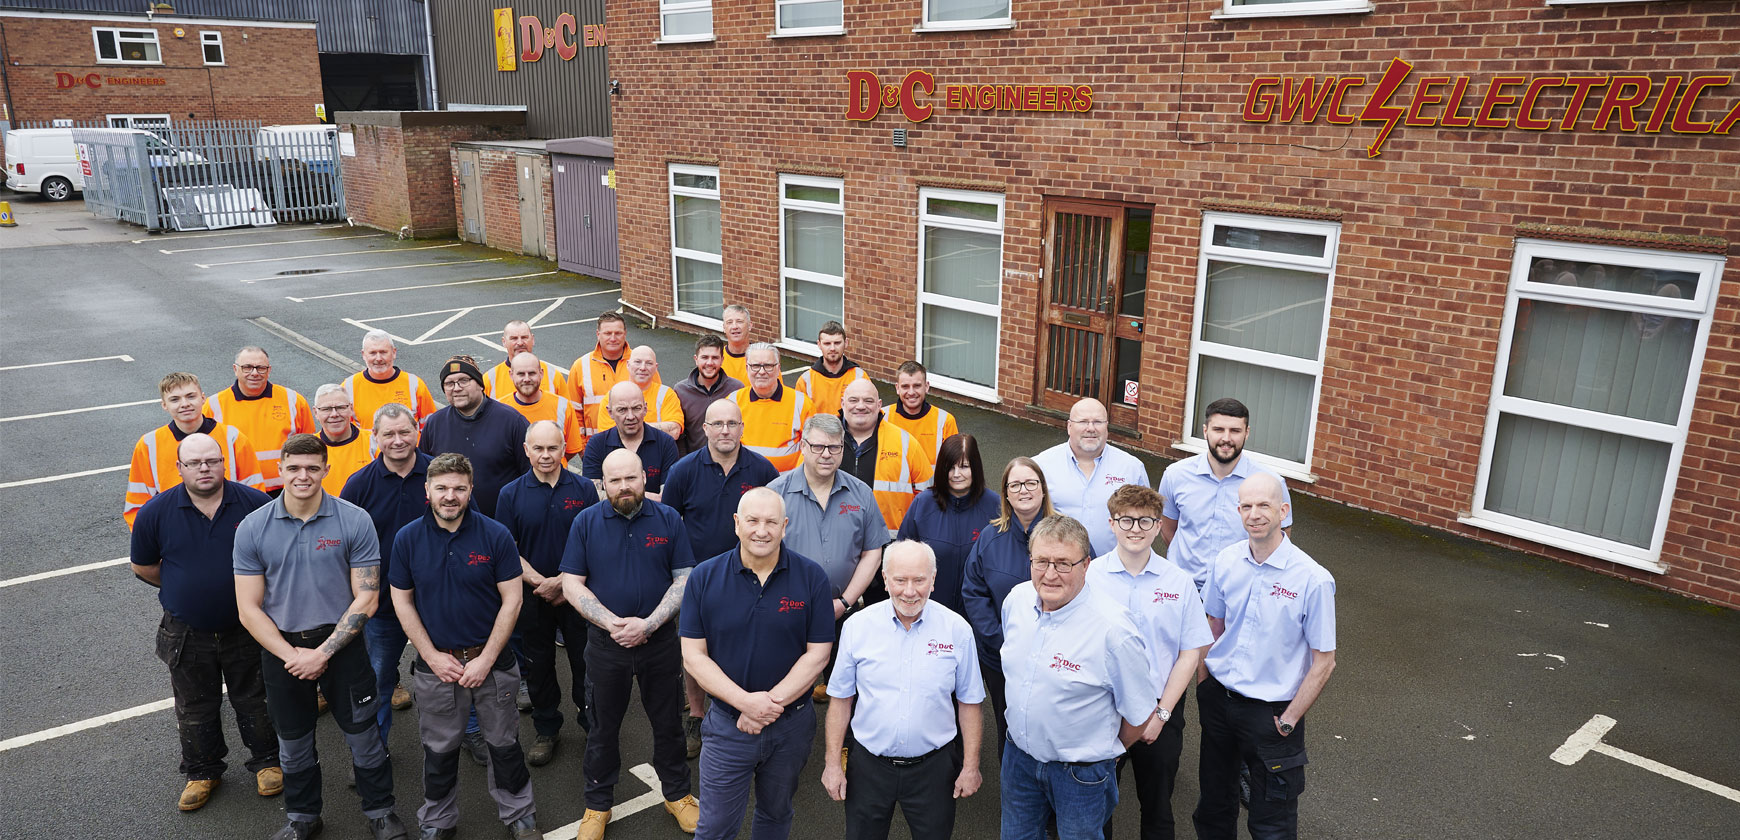 D & C Enginners - Group Staff Photo